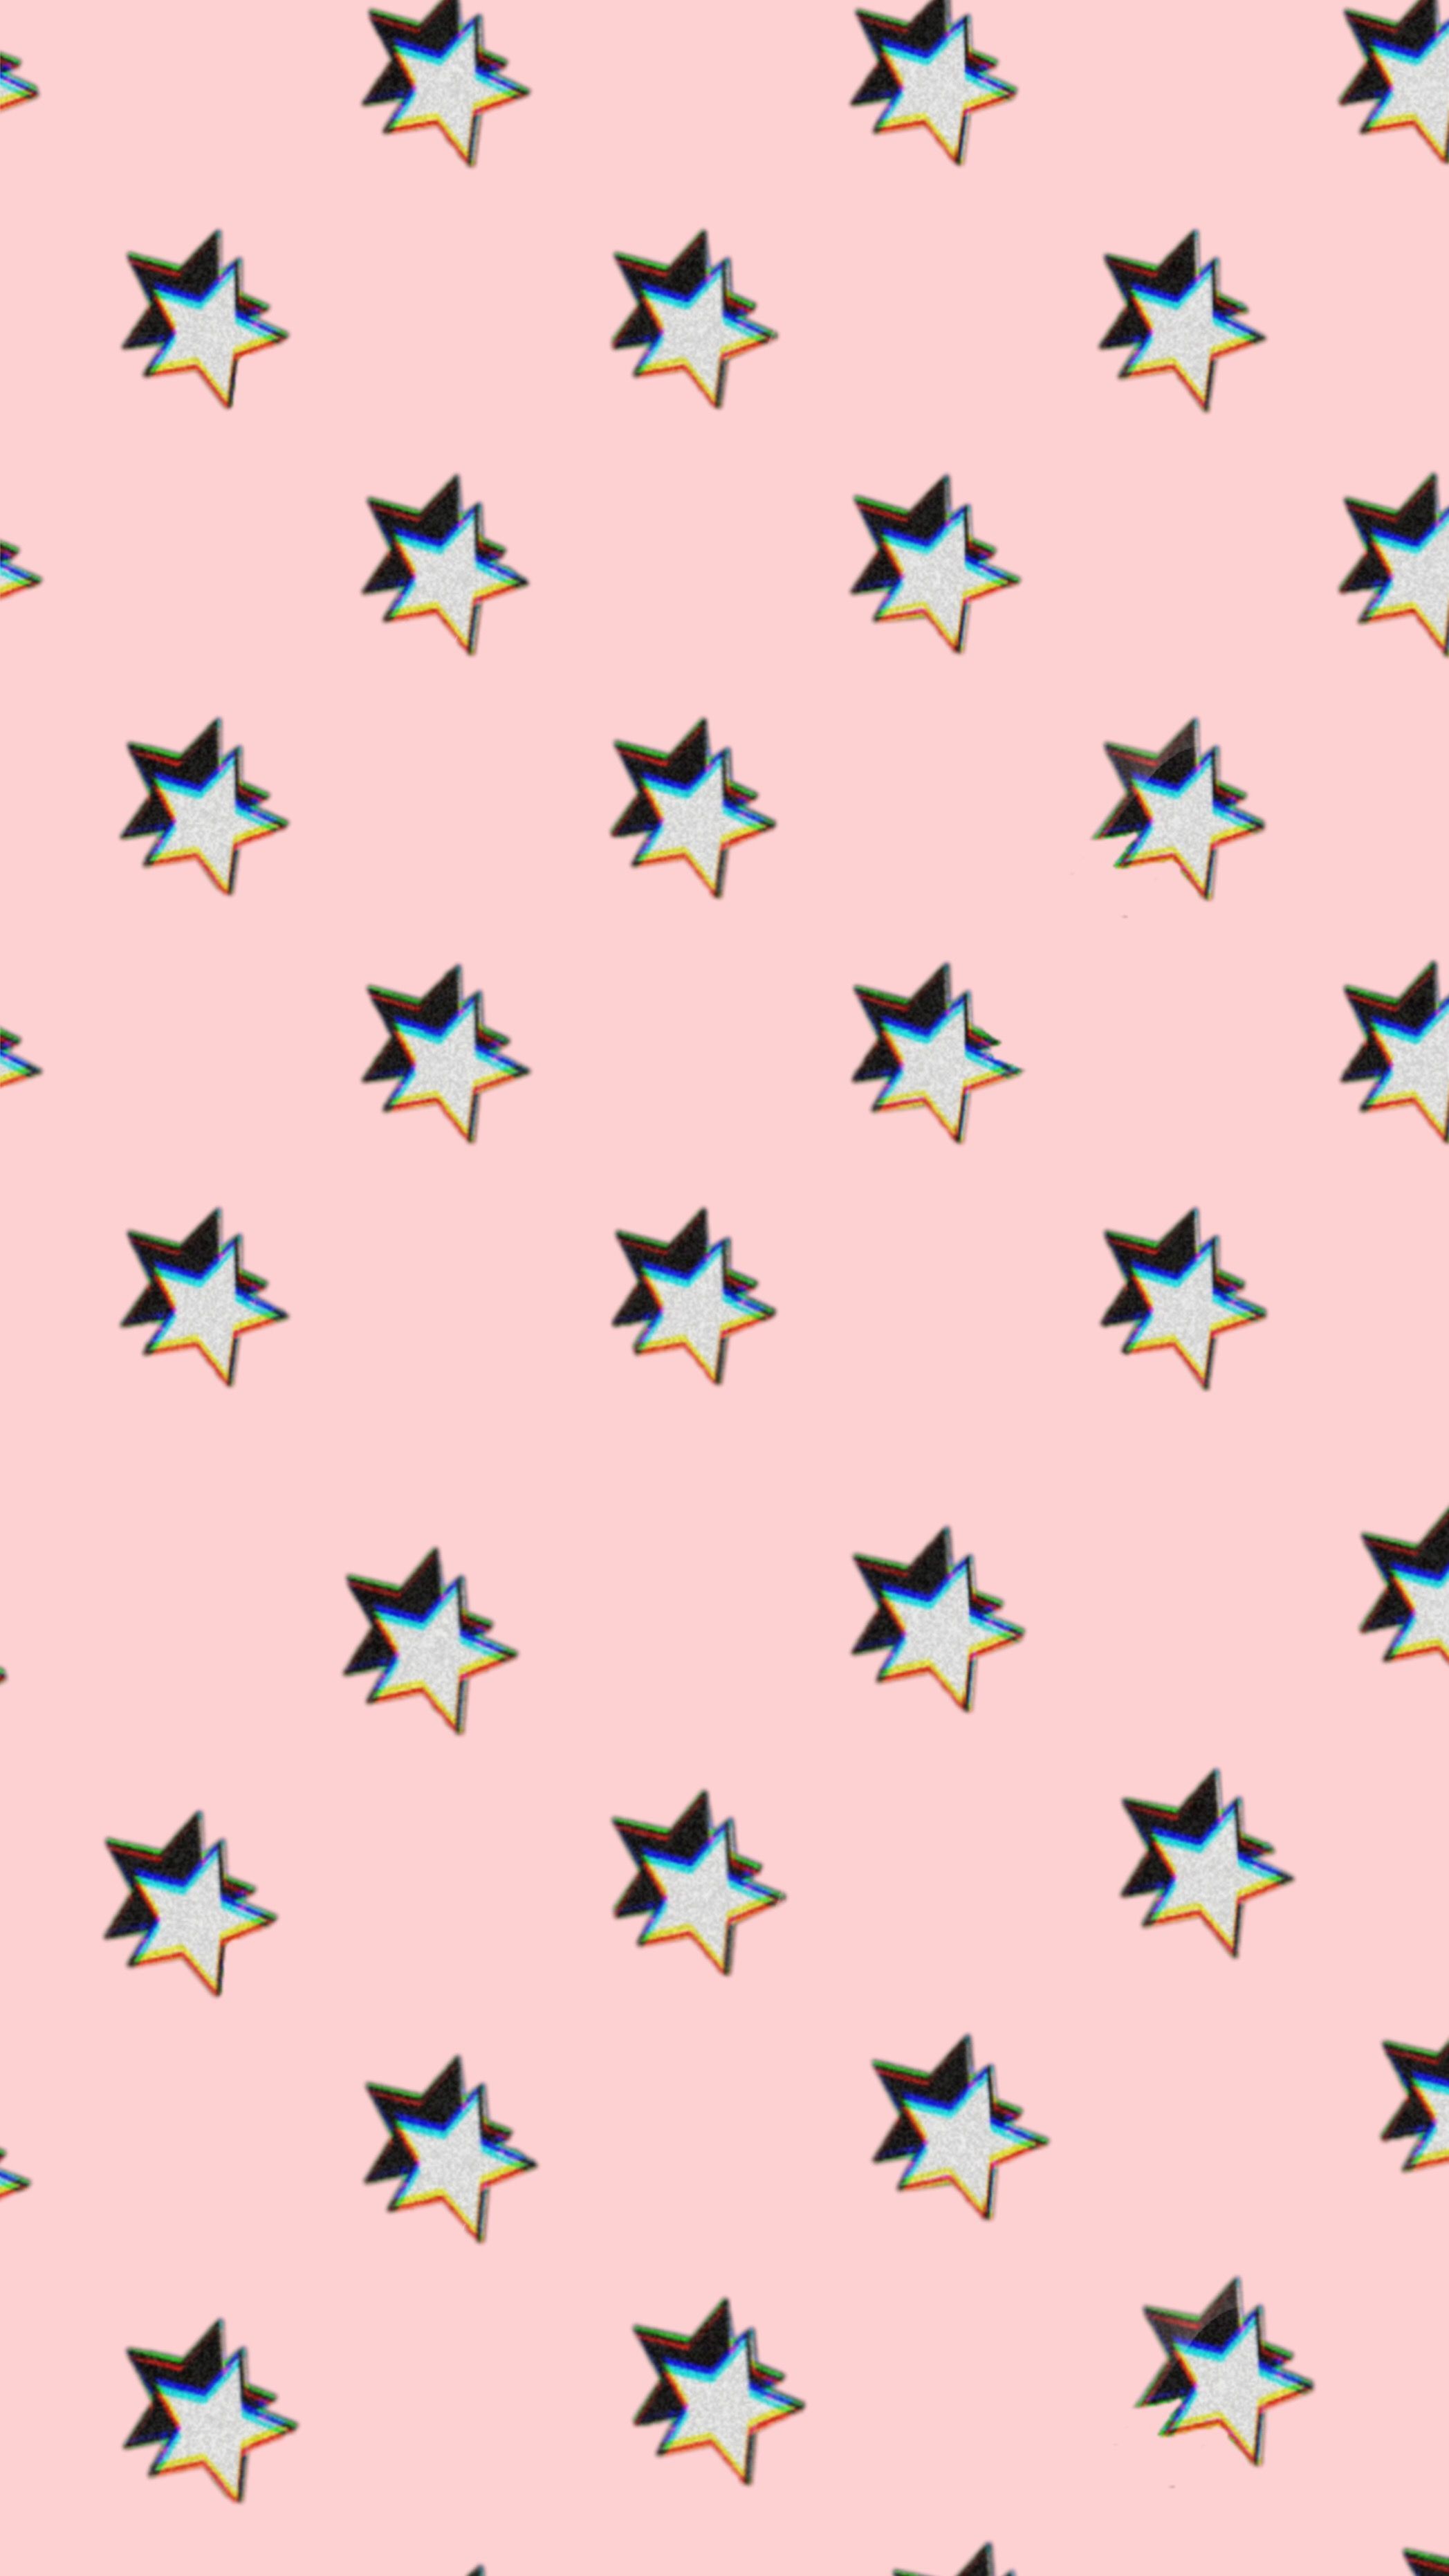 Aesthetic Star Wallpaper, Buy Now, Factory Sale, 60% OFF